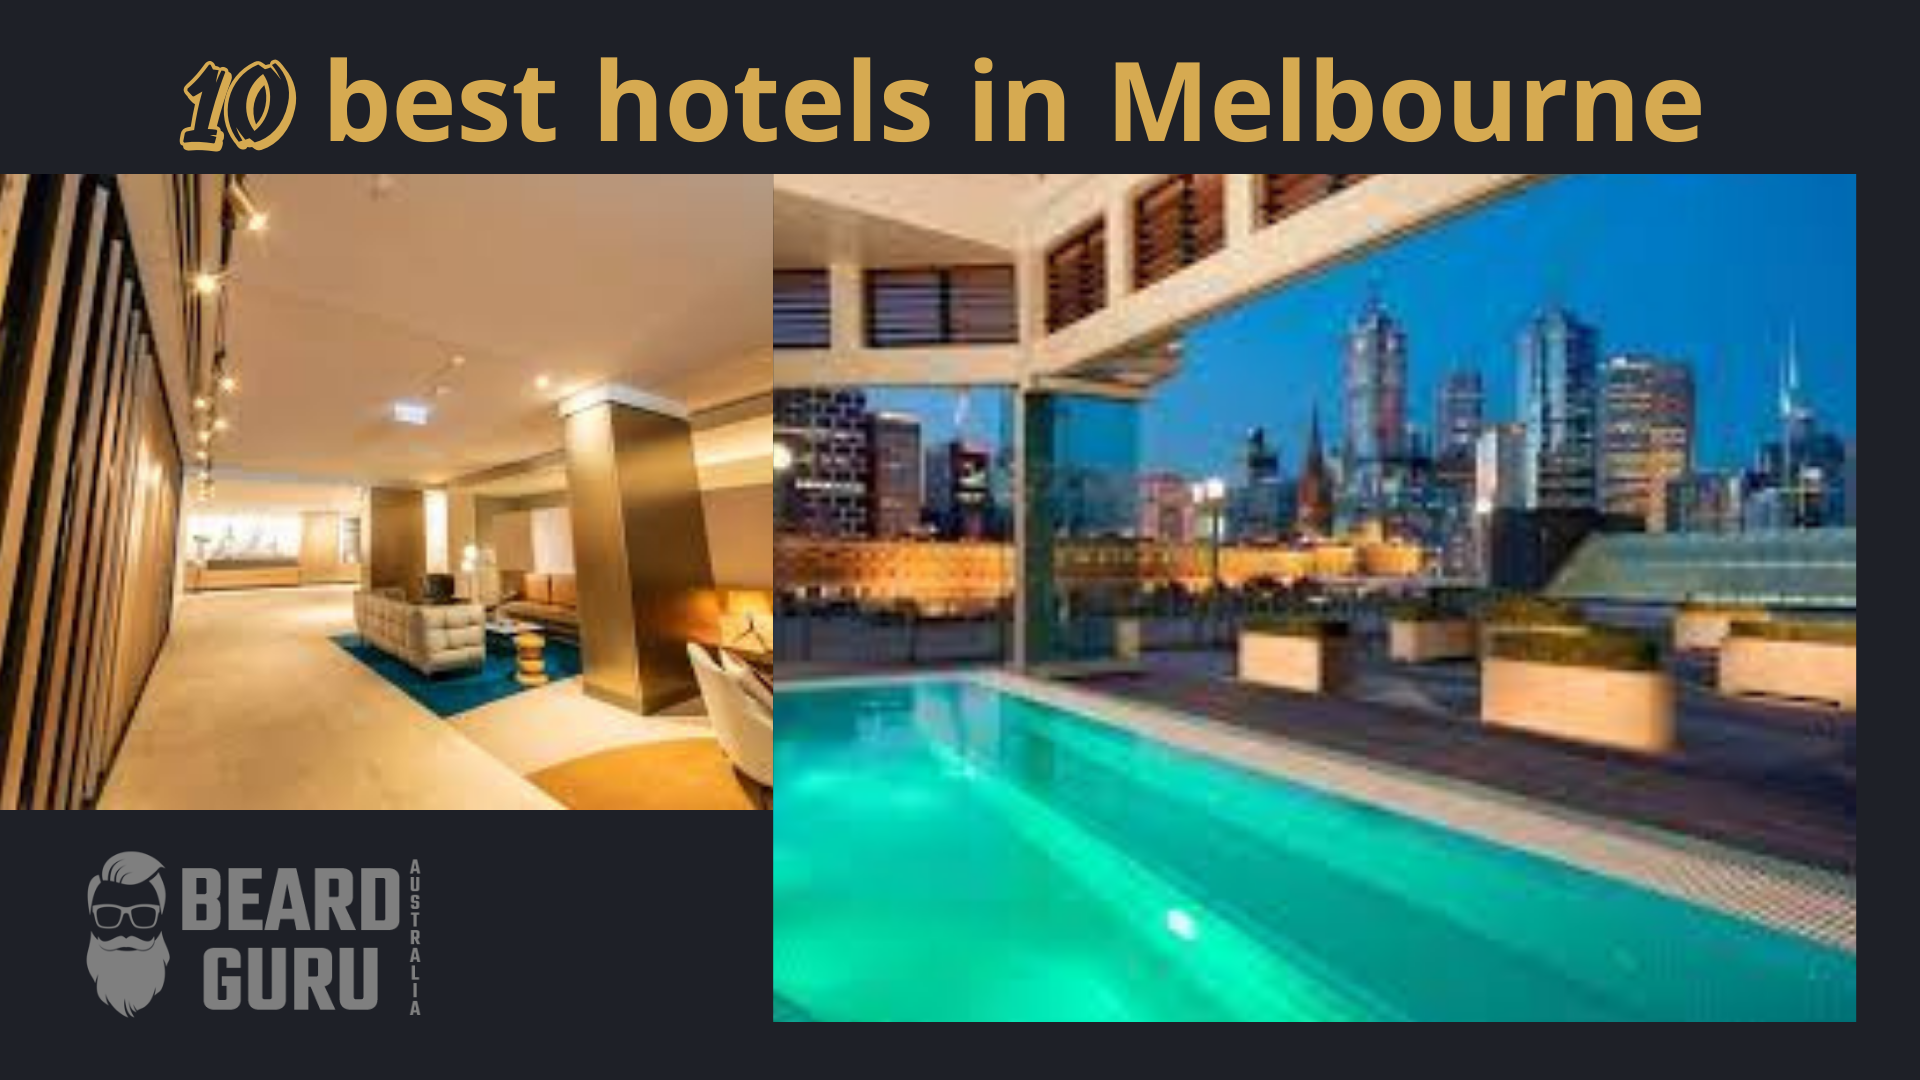 10 best hotels in Melbourne